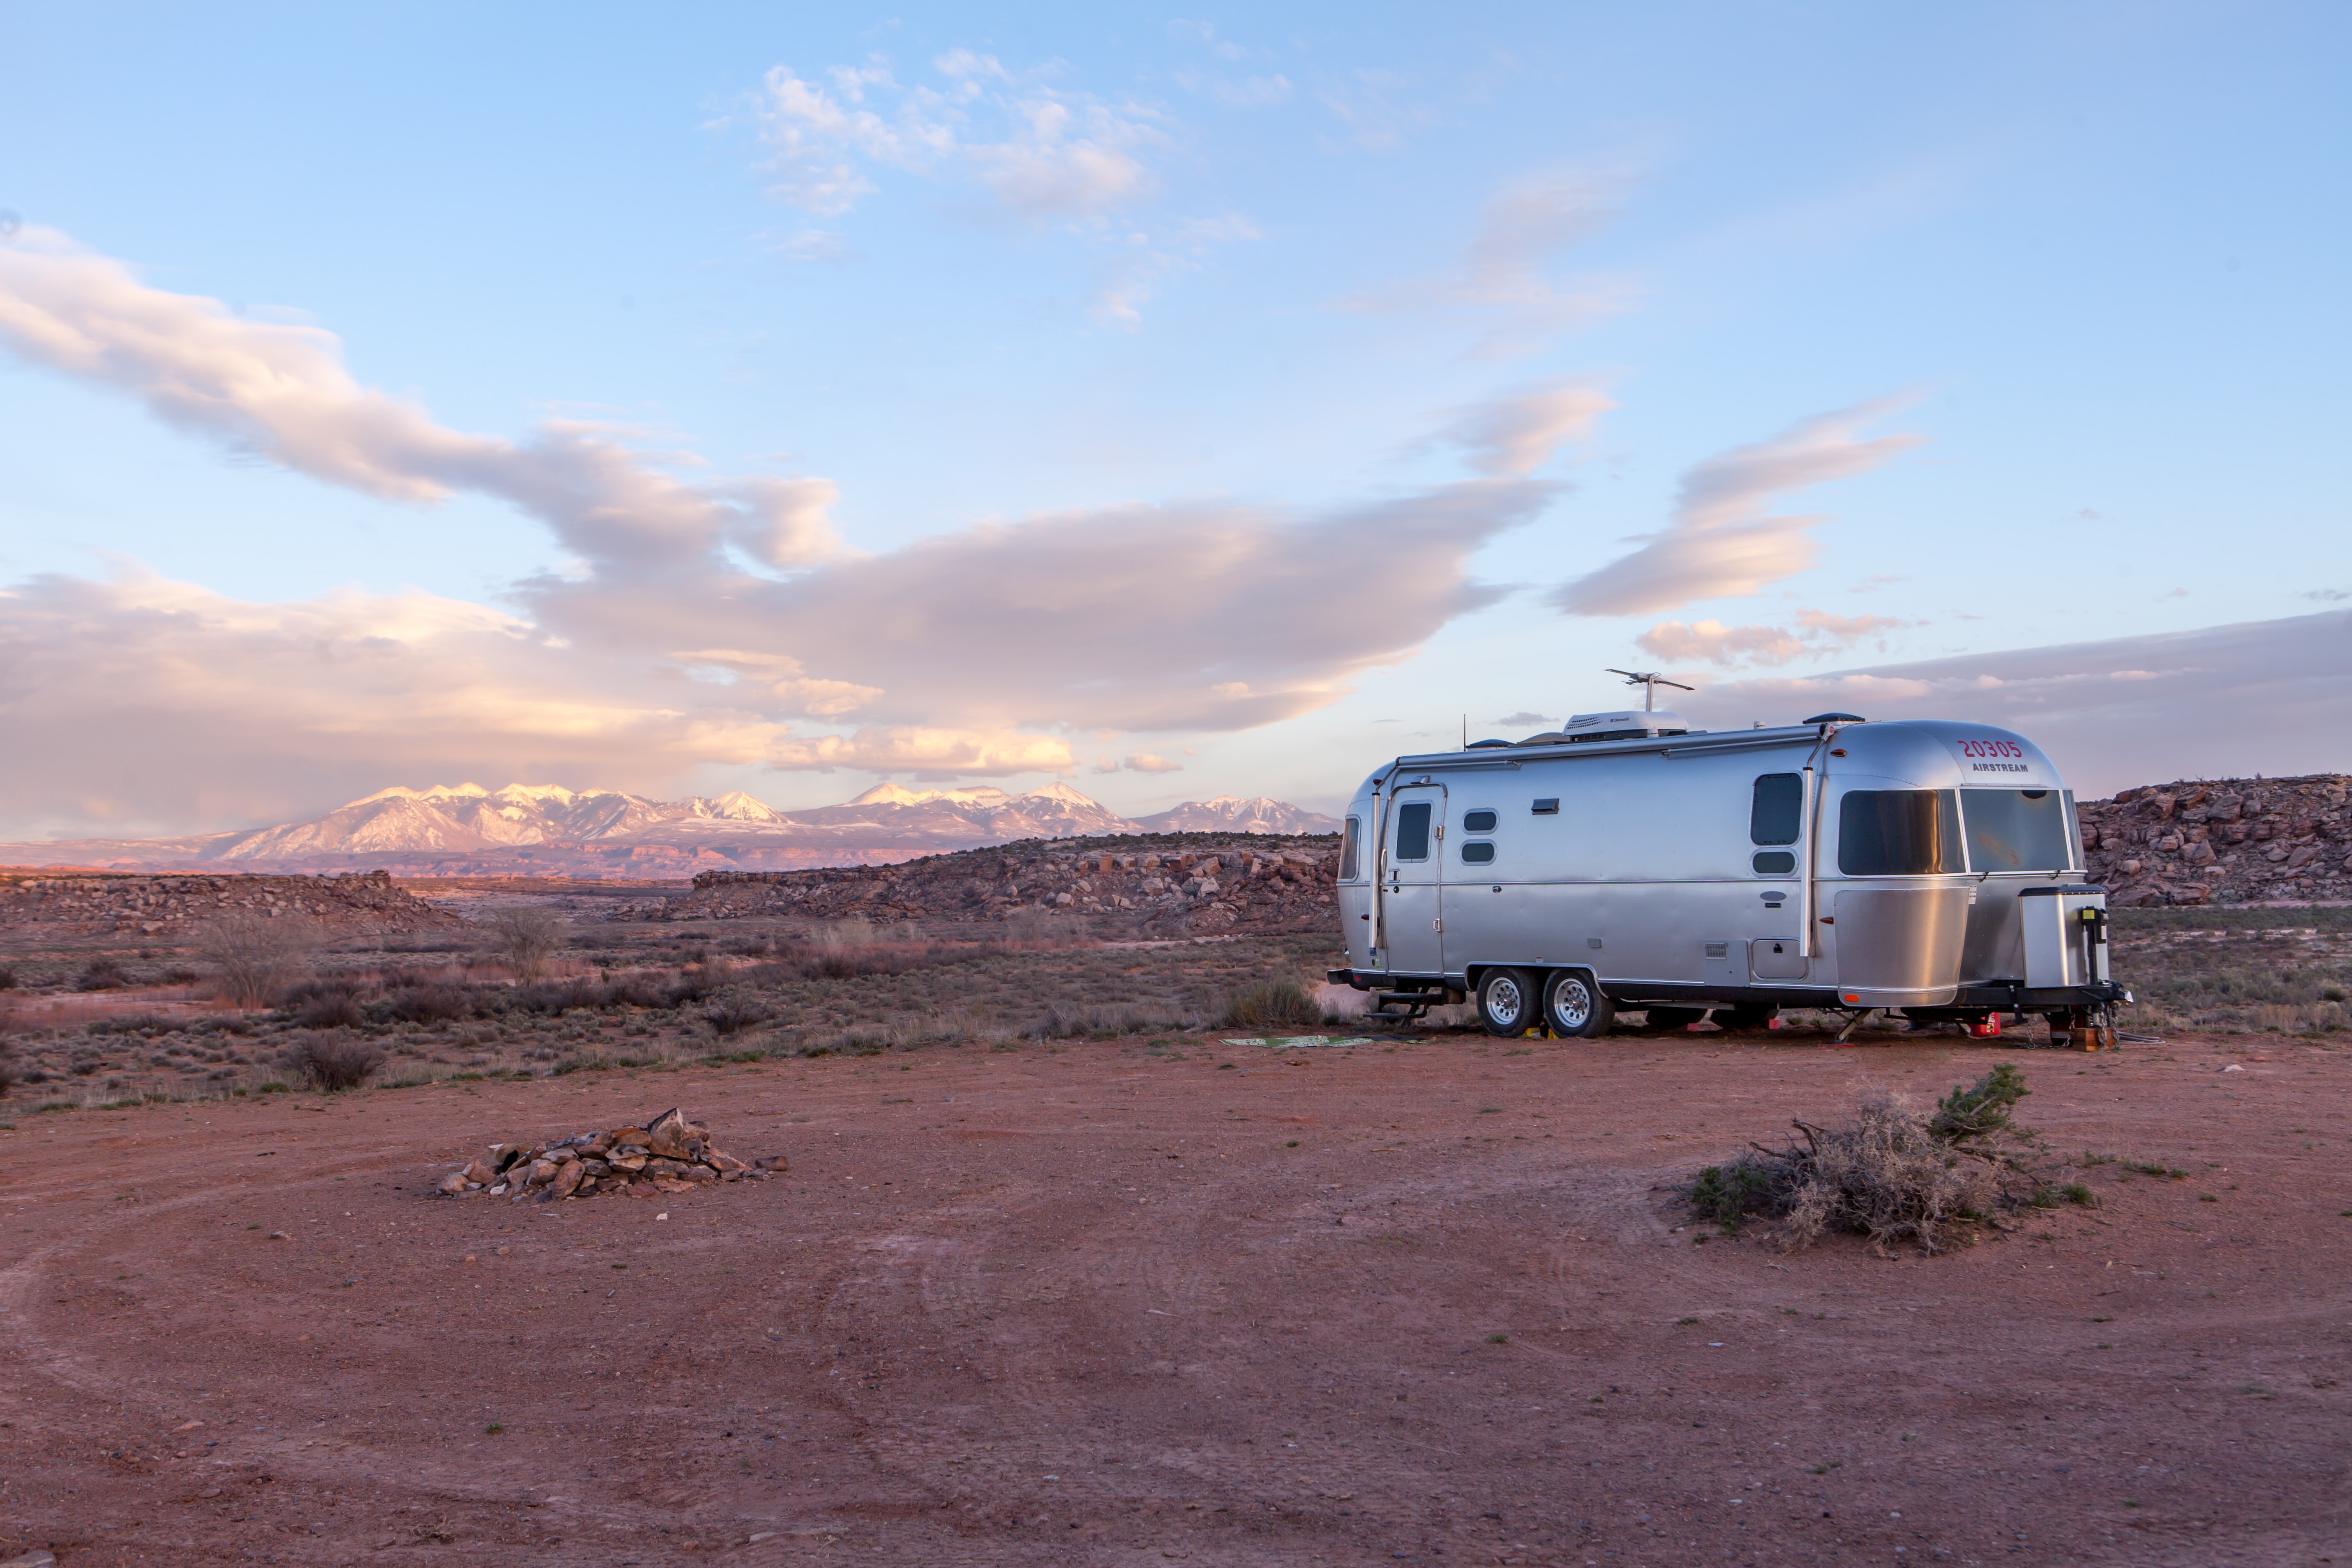 Grey and black recreational vehicle on ground under blue and white sky photo